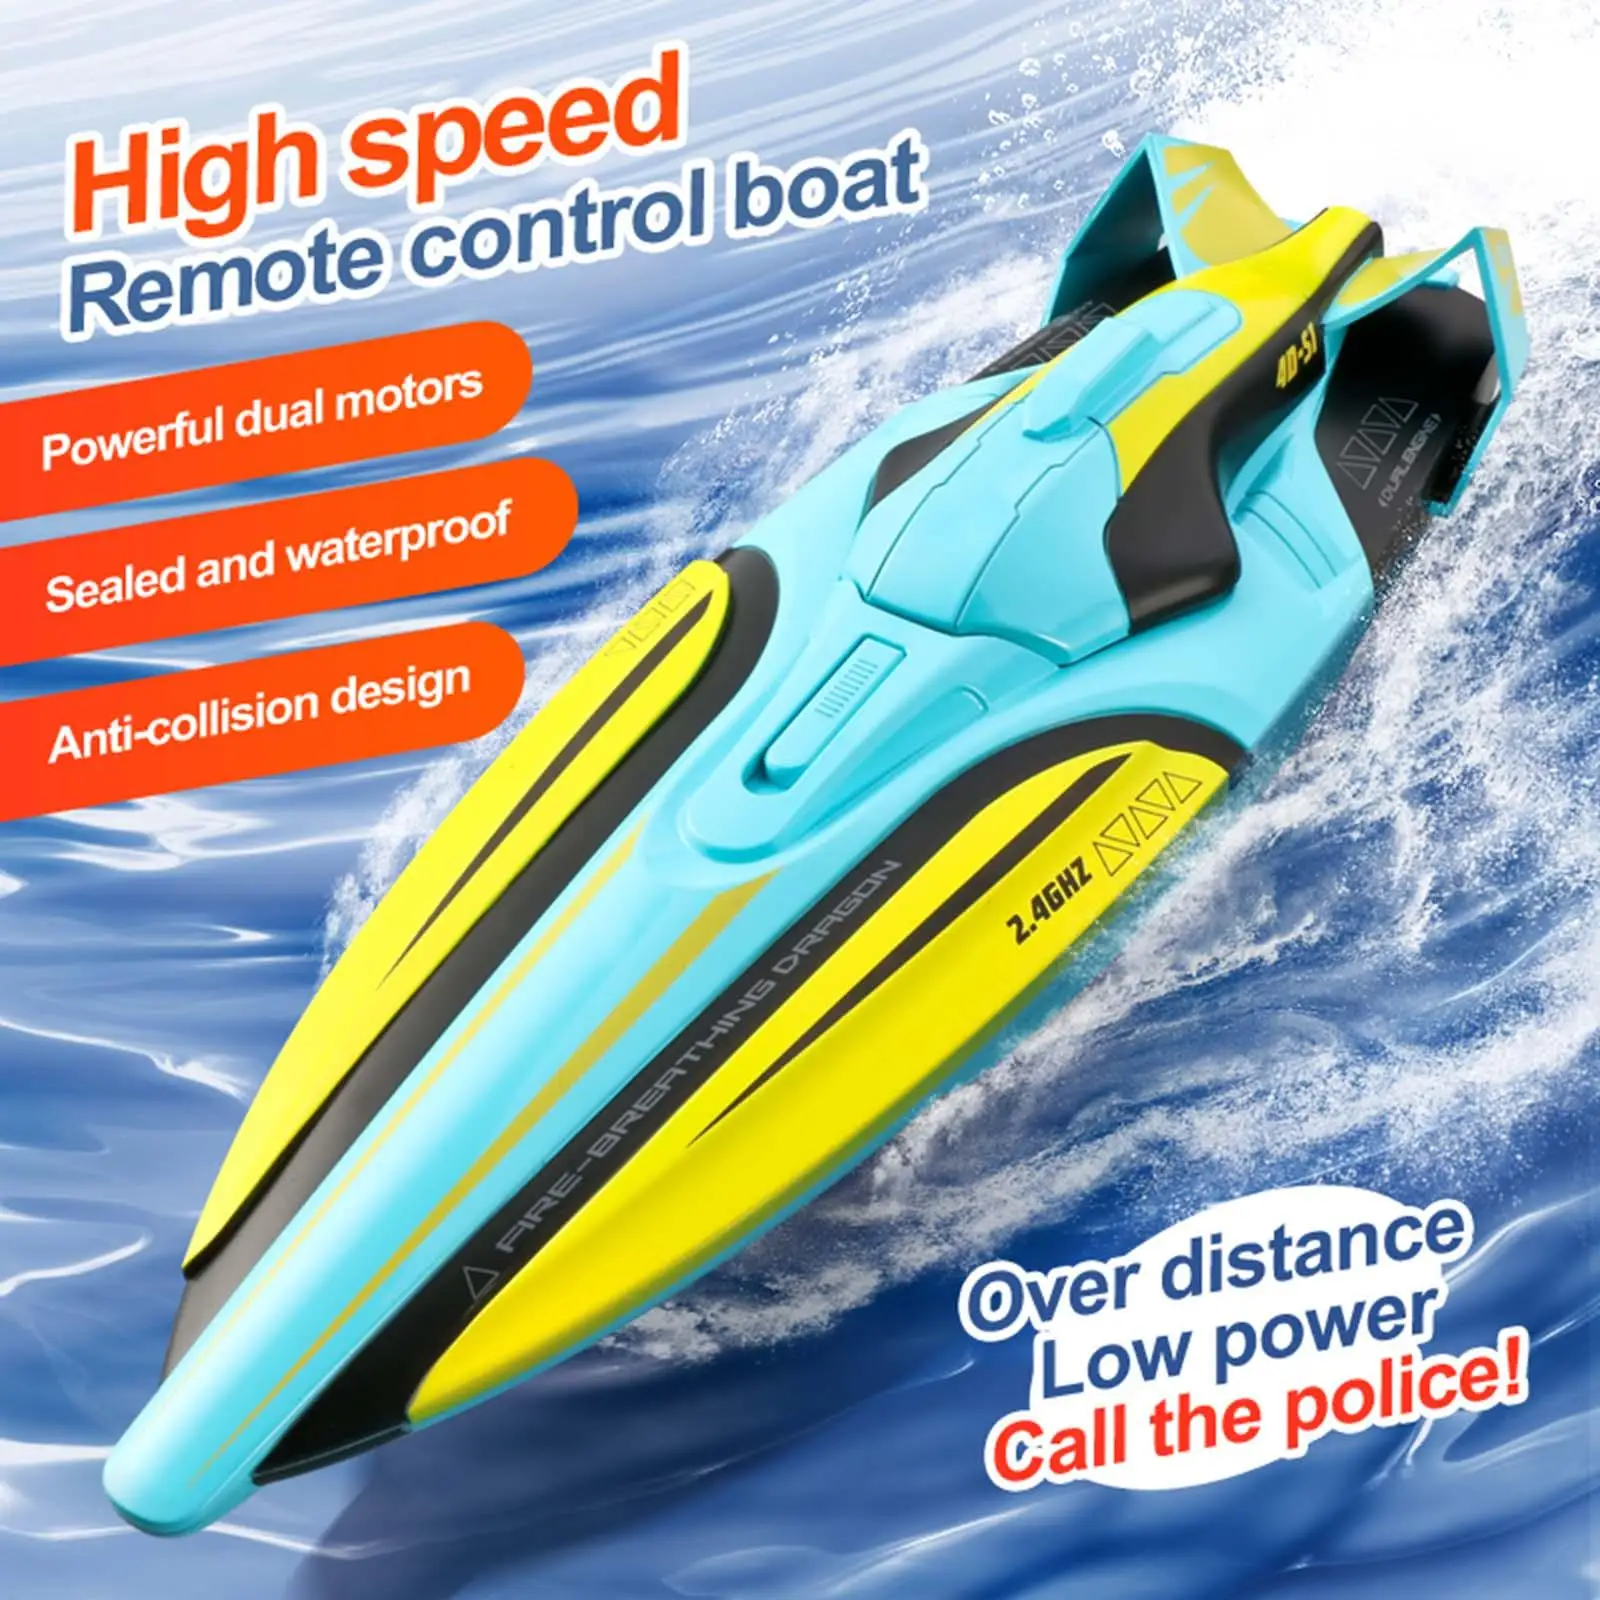 Remote Control Boat with Light Waterproof Left and Right 800mAh Forward 30km/H Dural Motor for Teens Adults Kids Birthday Gifts